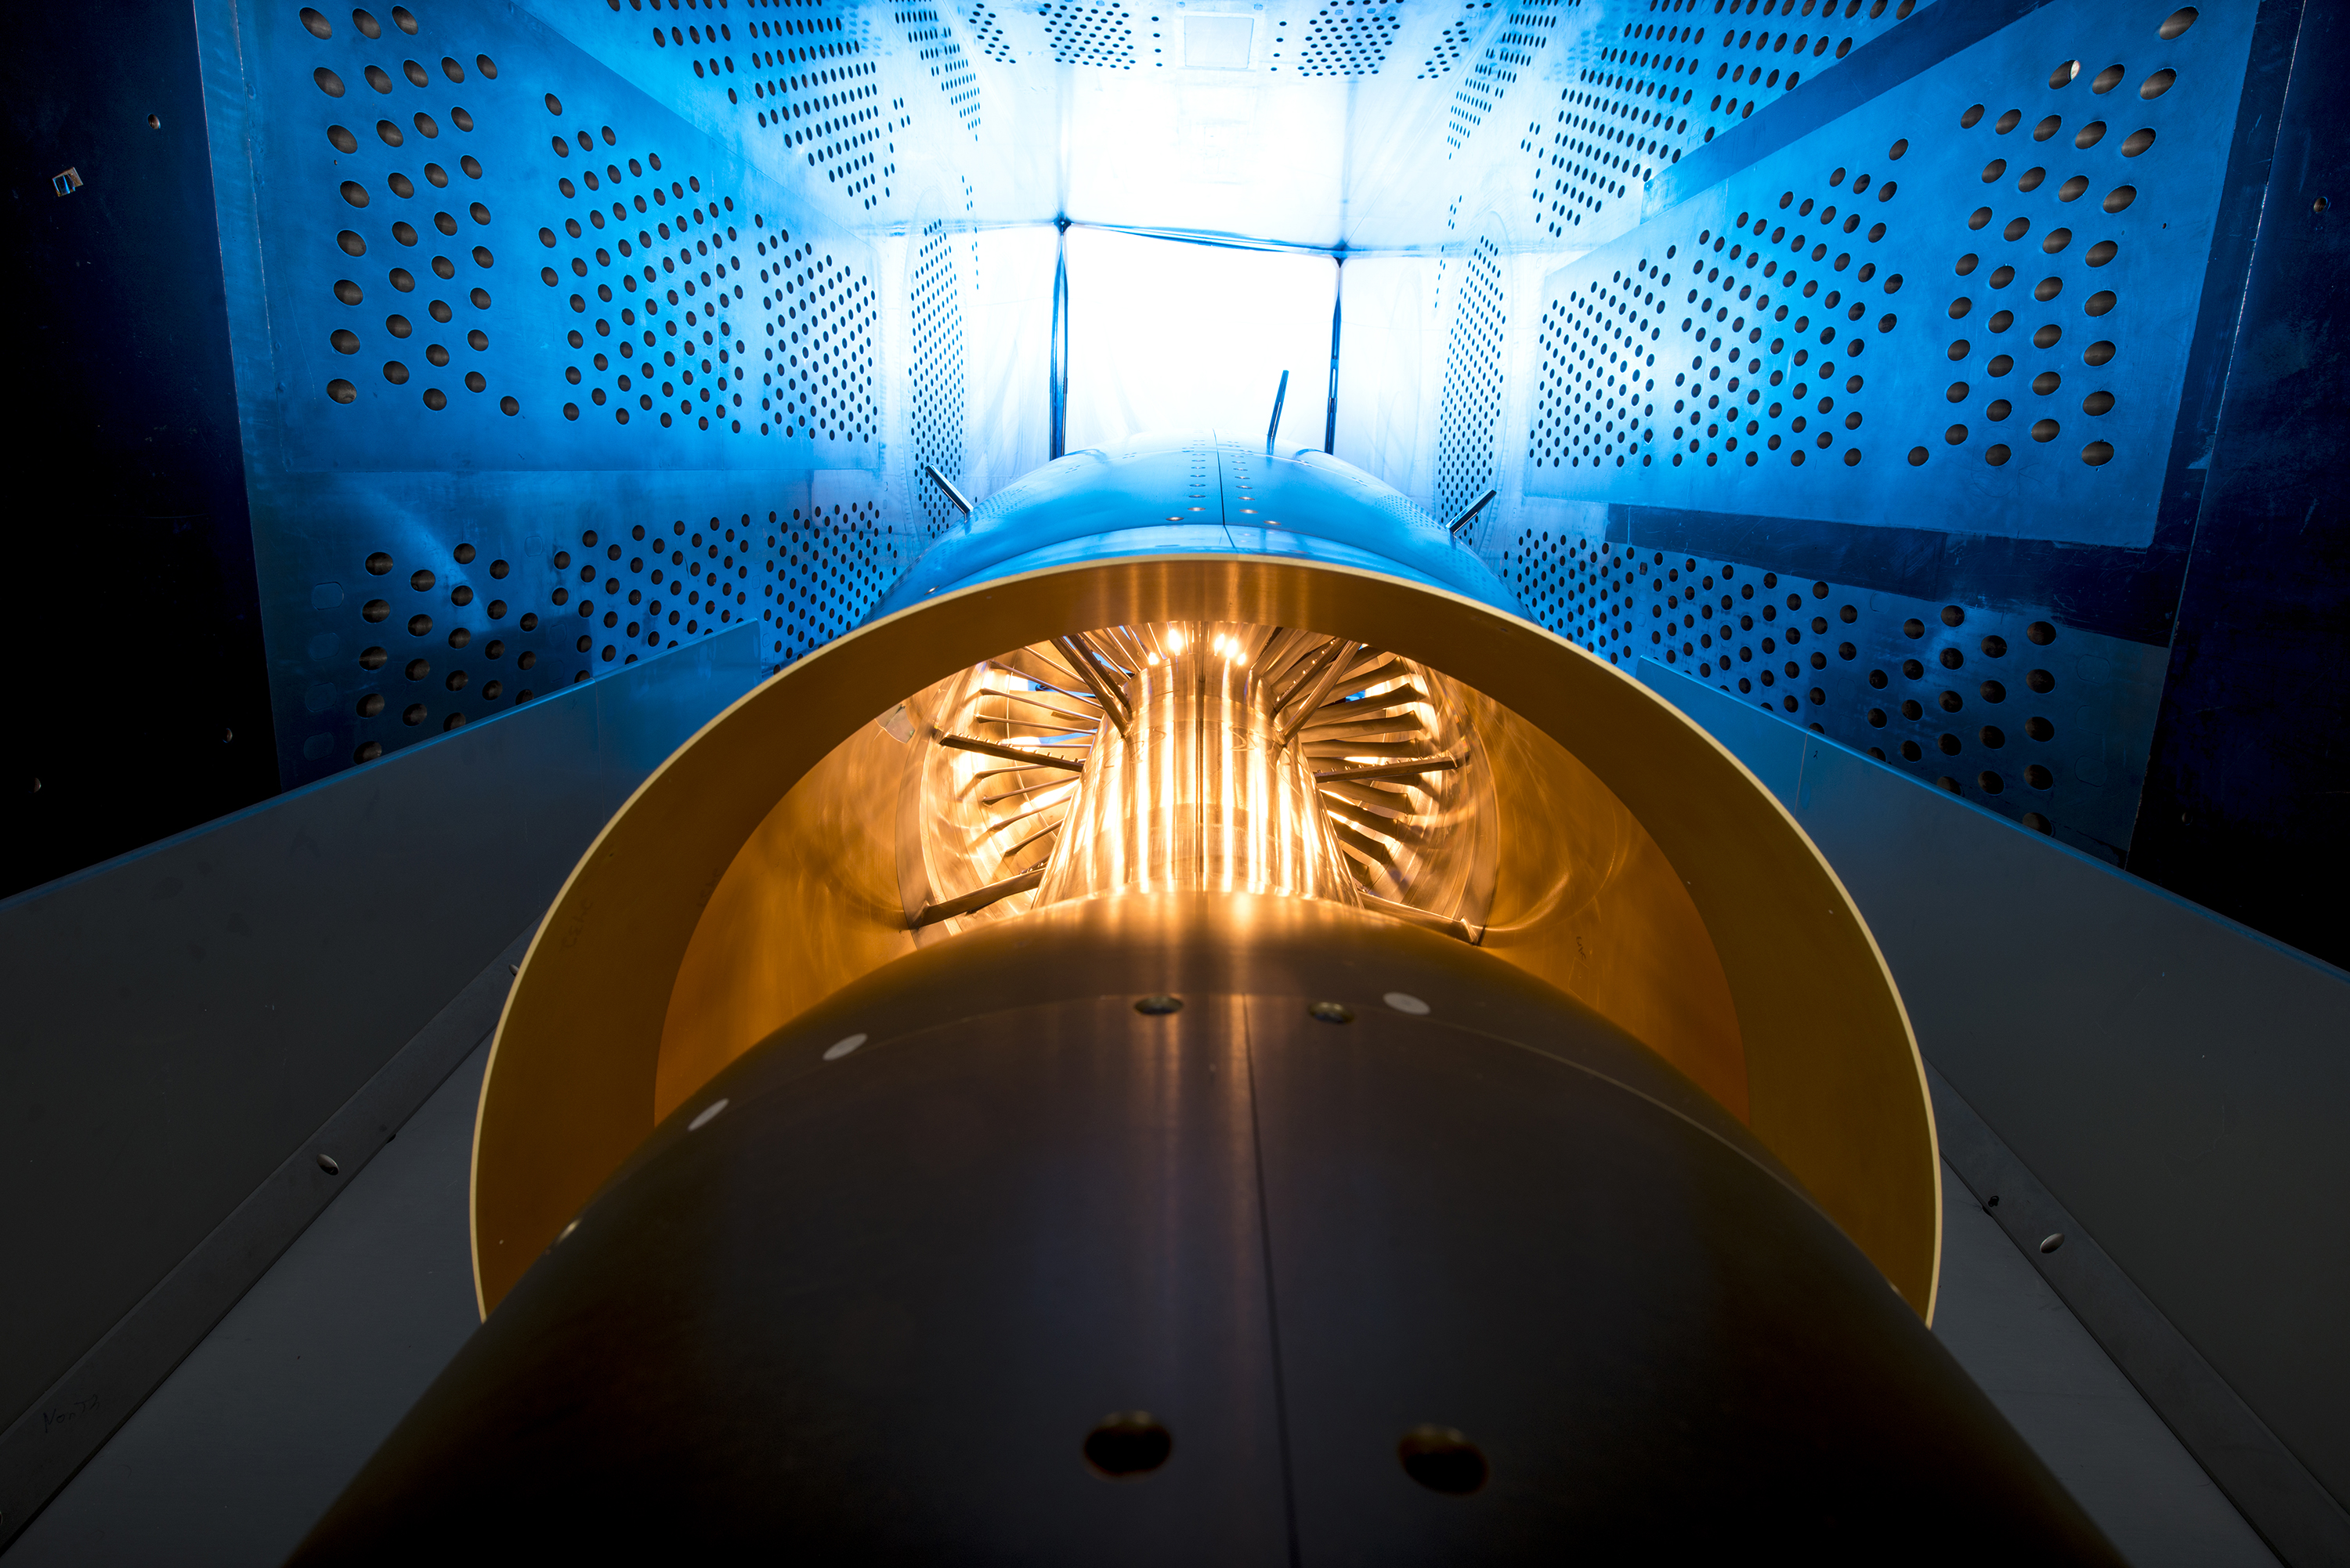 A fan and inlet design exploiting boundary-layer ingestion (BLI) is tested in a wind tunnel at NASA’s Glenn Research Center. Credit: NASA